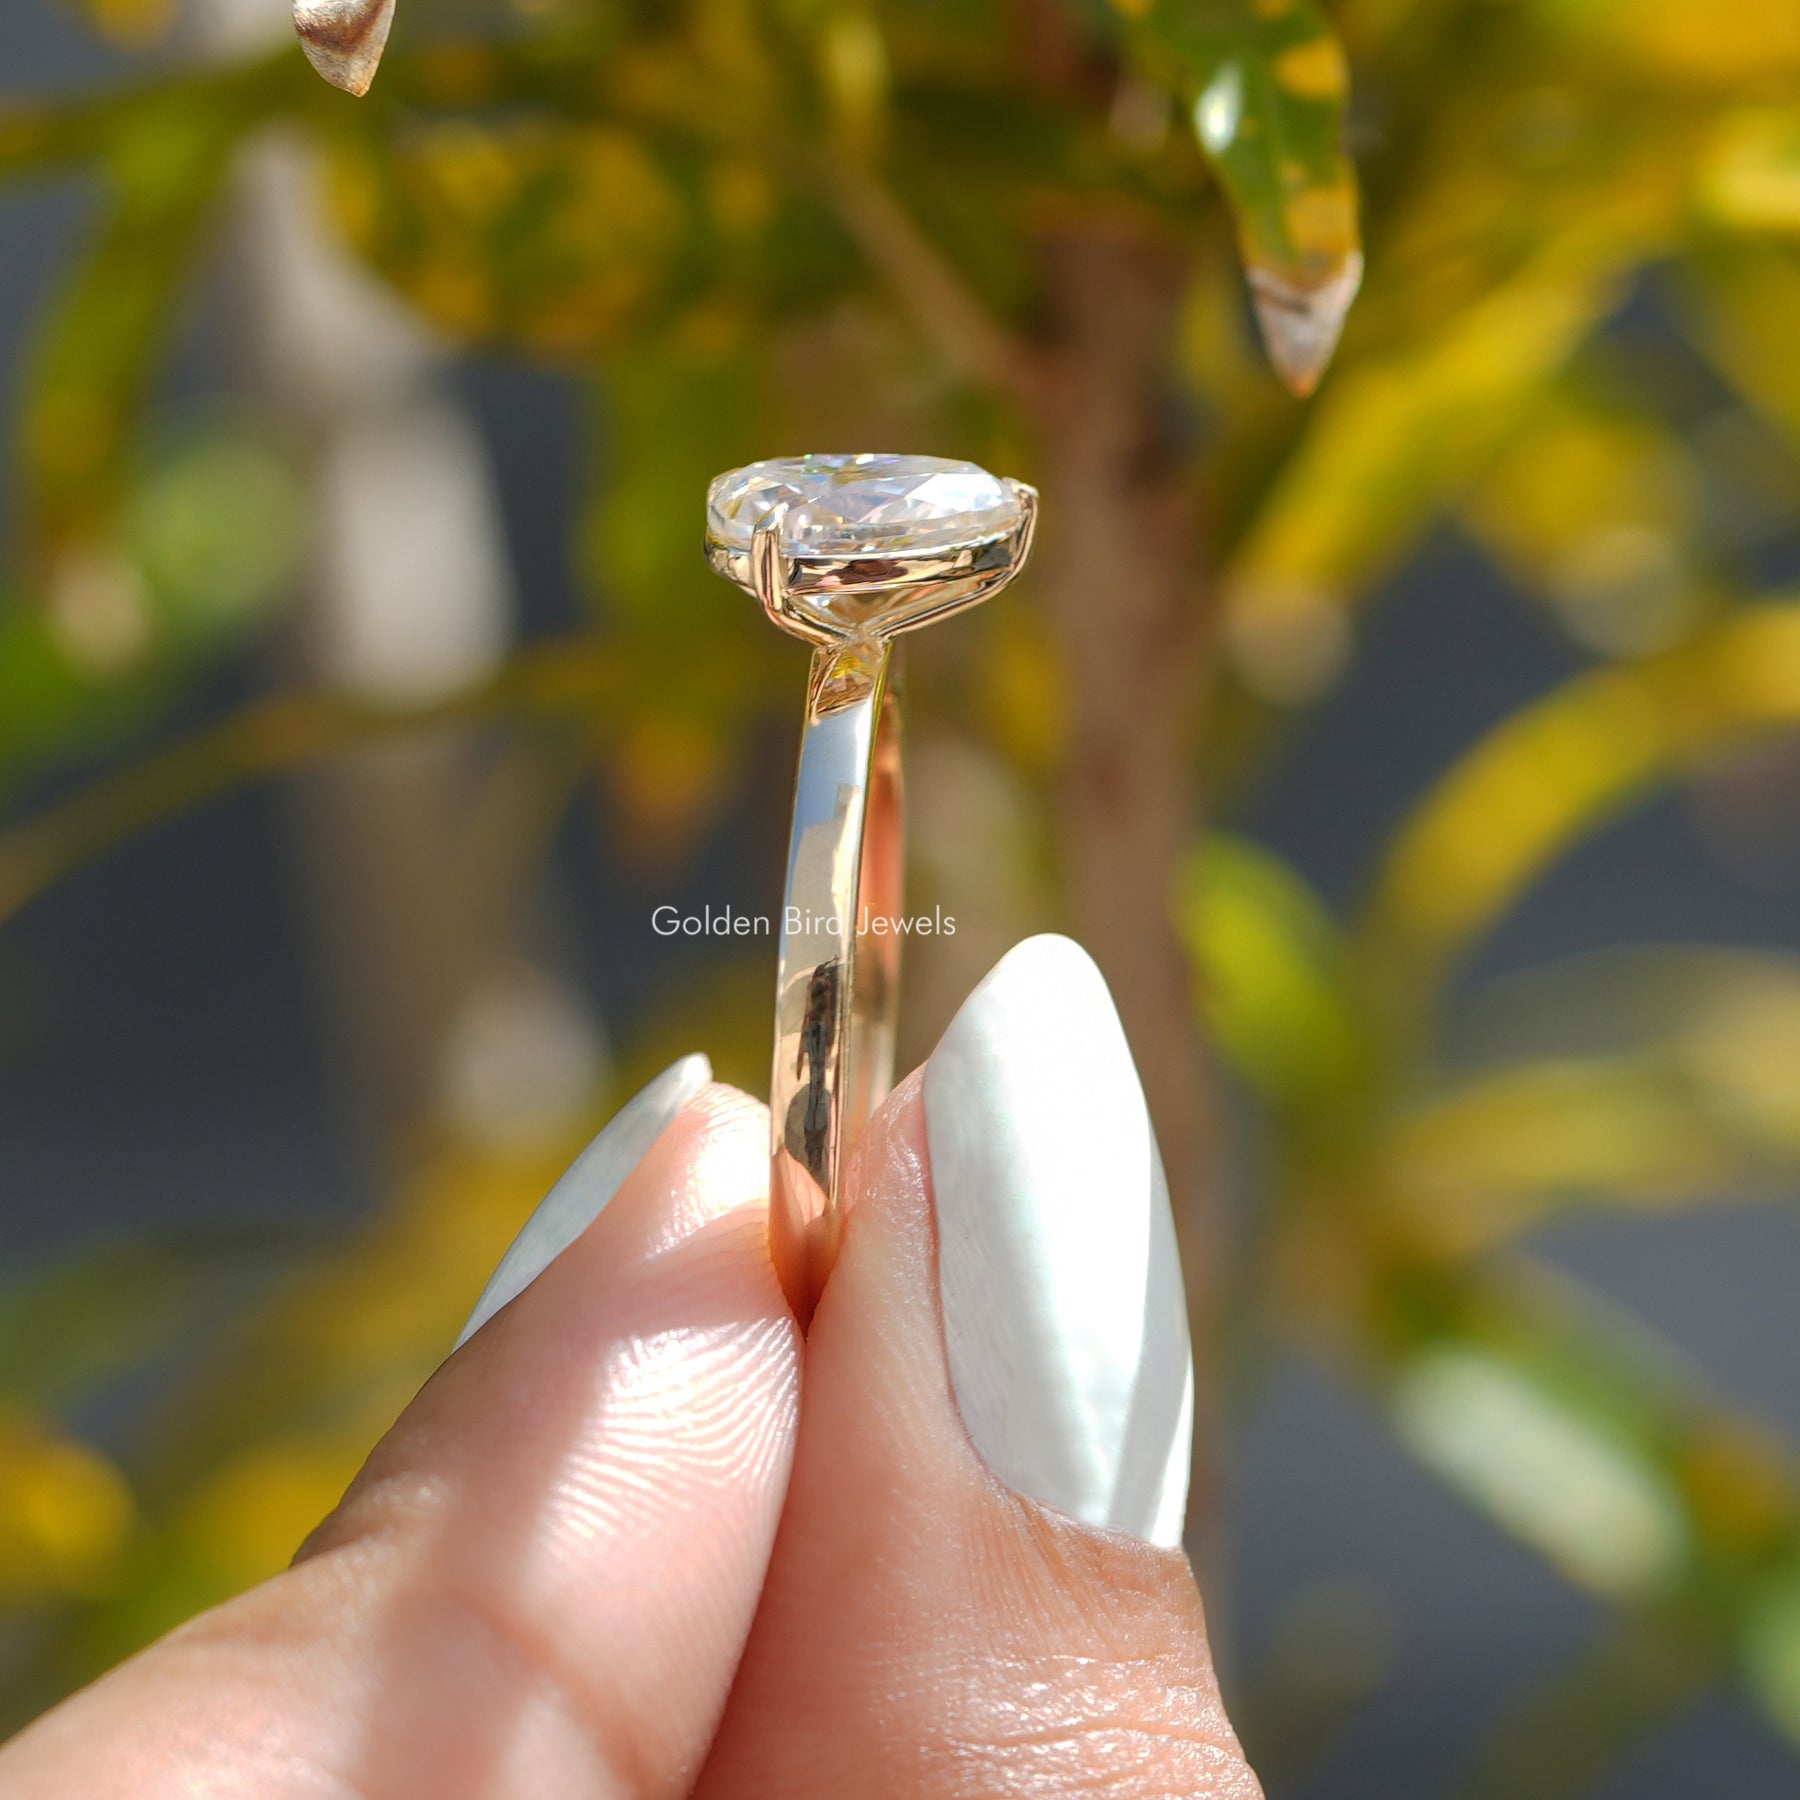 [In Finger Side View Of To et Moi Engagement Ring In Solid Gold]-[Golden Bird Jewels]